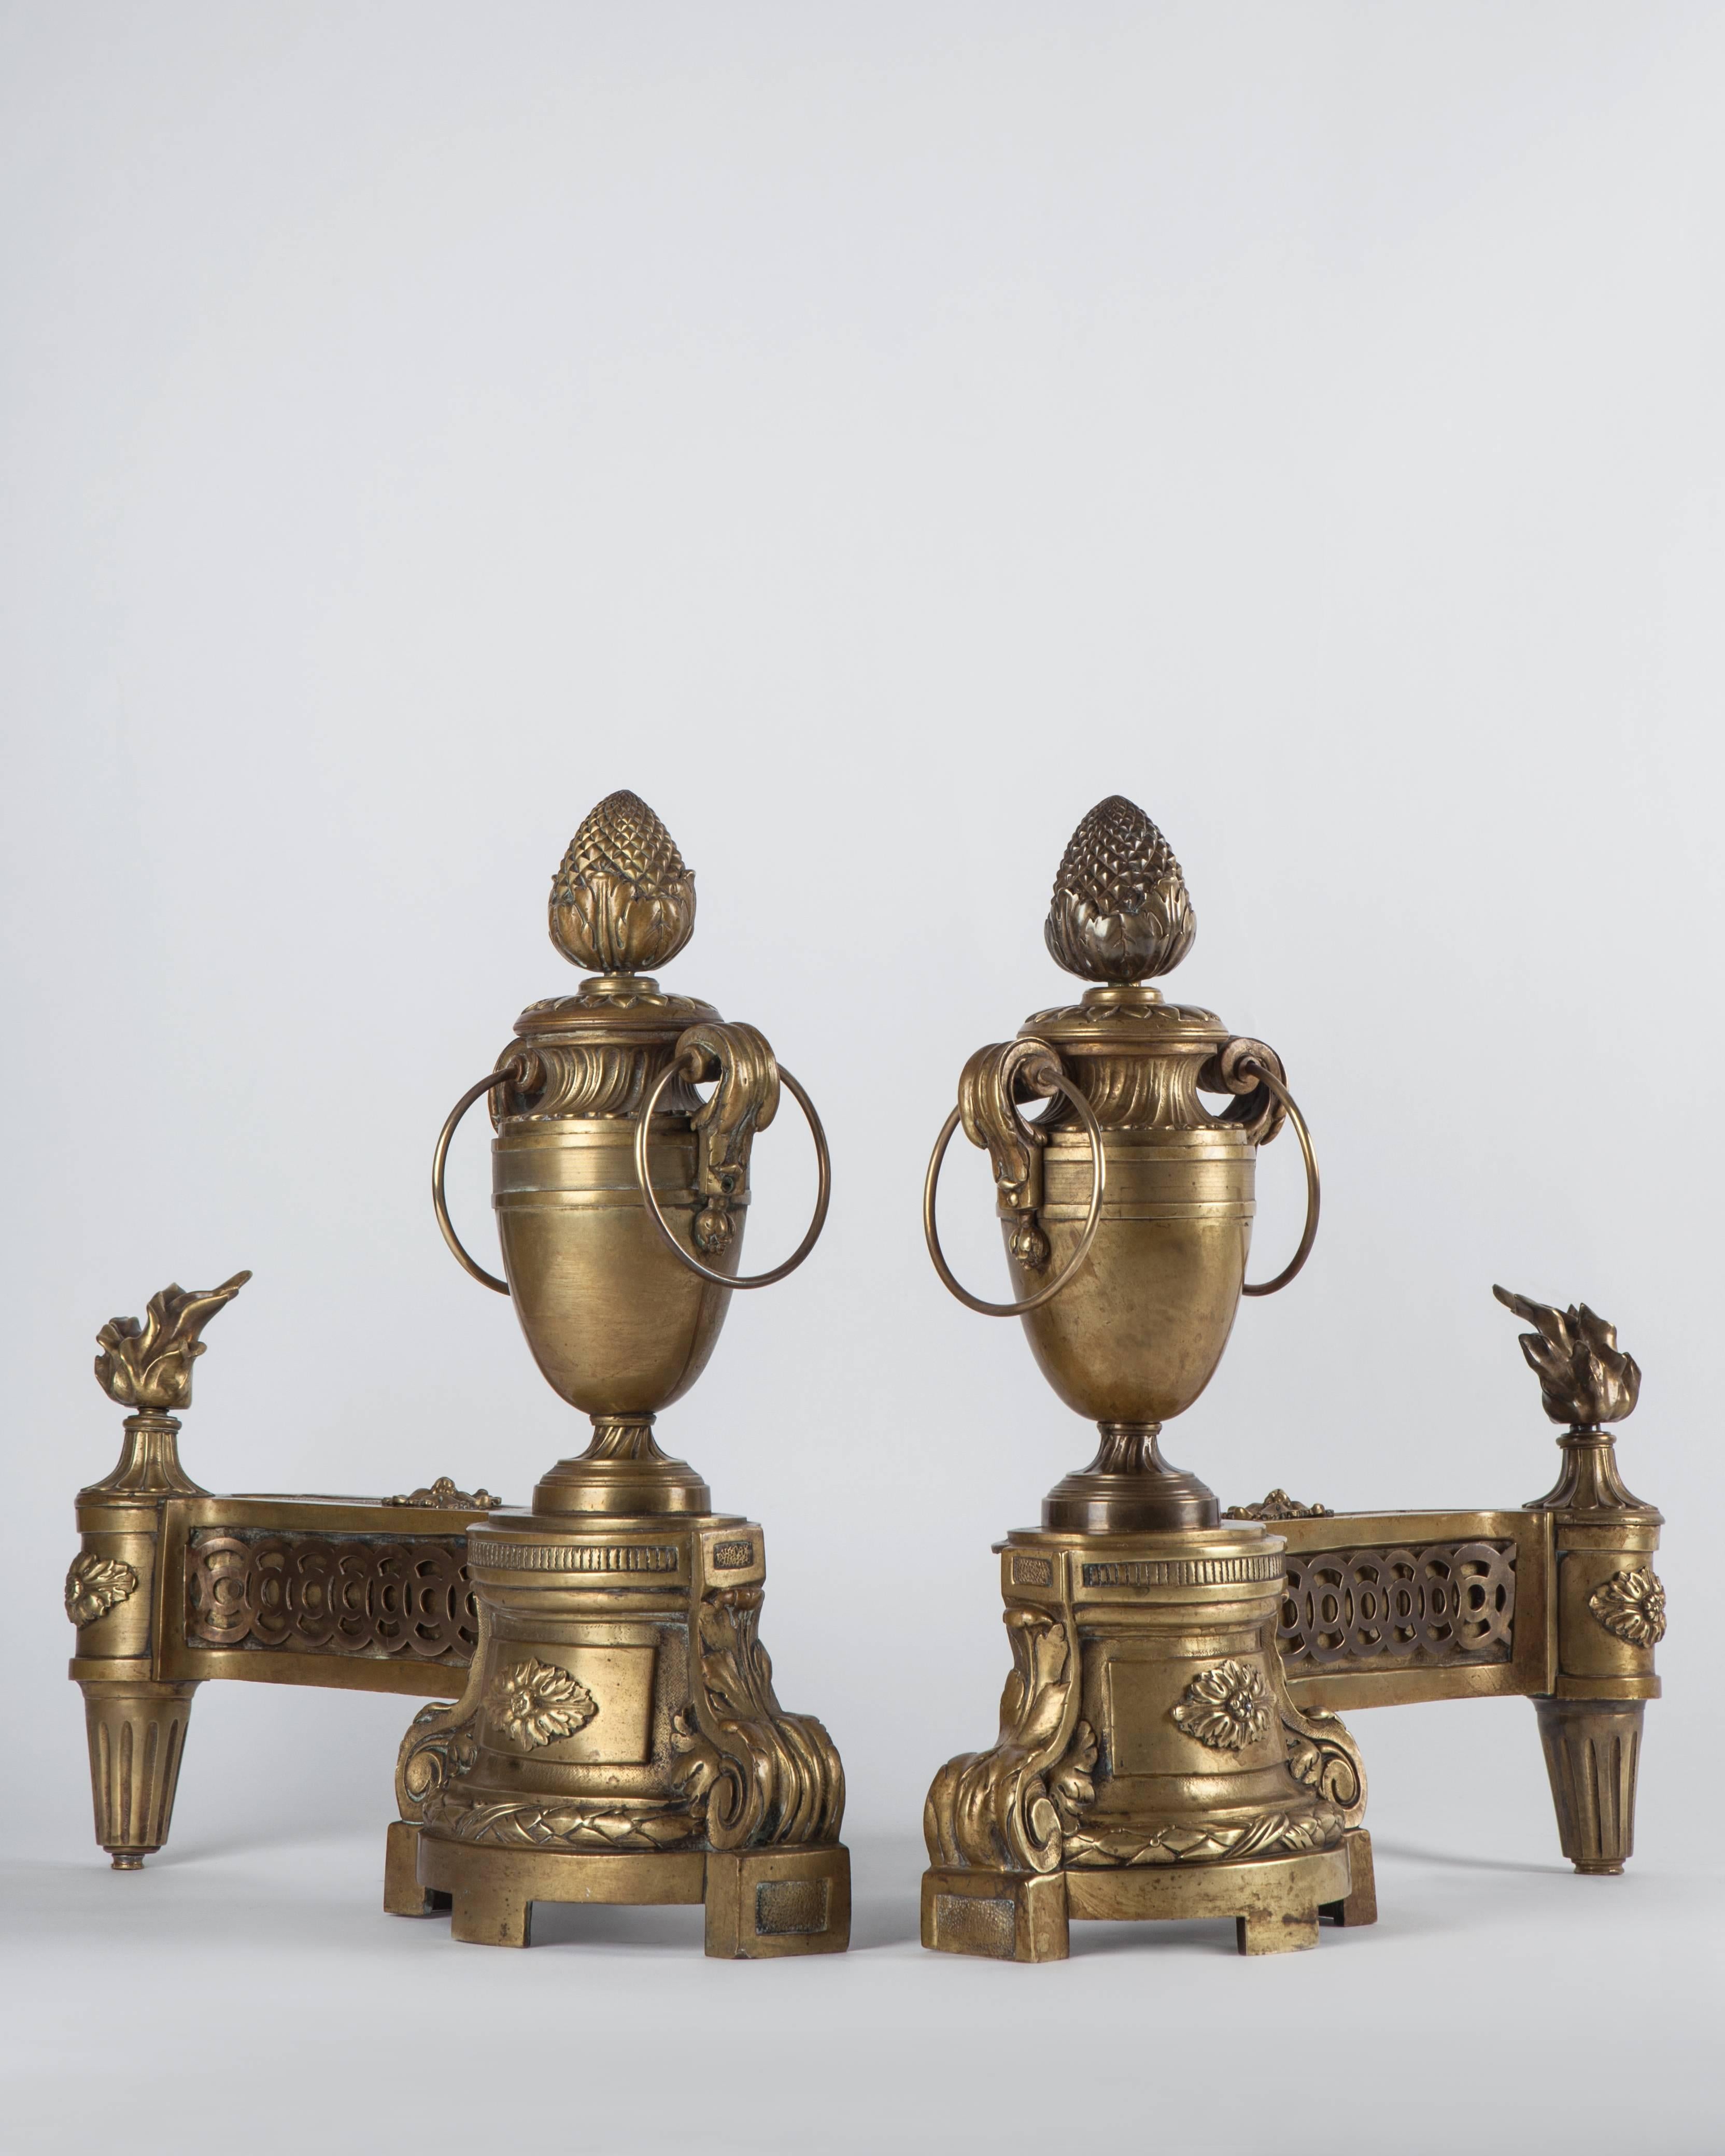 Mid-19th Century French Urn Form Chenets with Flame and Pinecone Finials in Aged Brass, c. 1860s For Sale